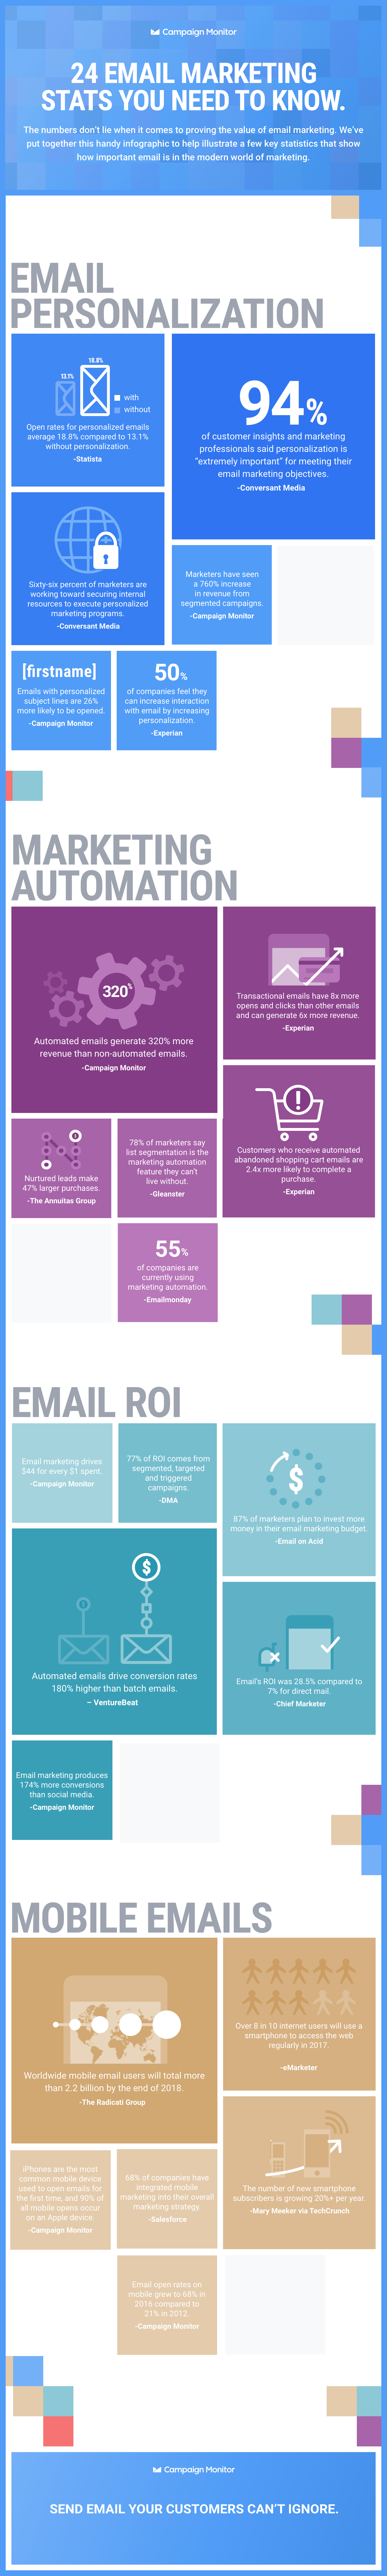 Infographic Email Marketing Stats